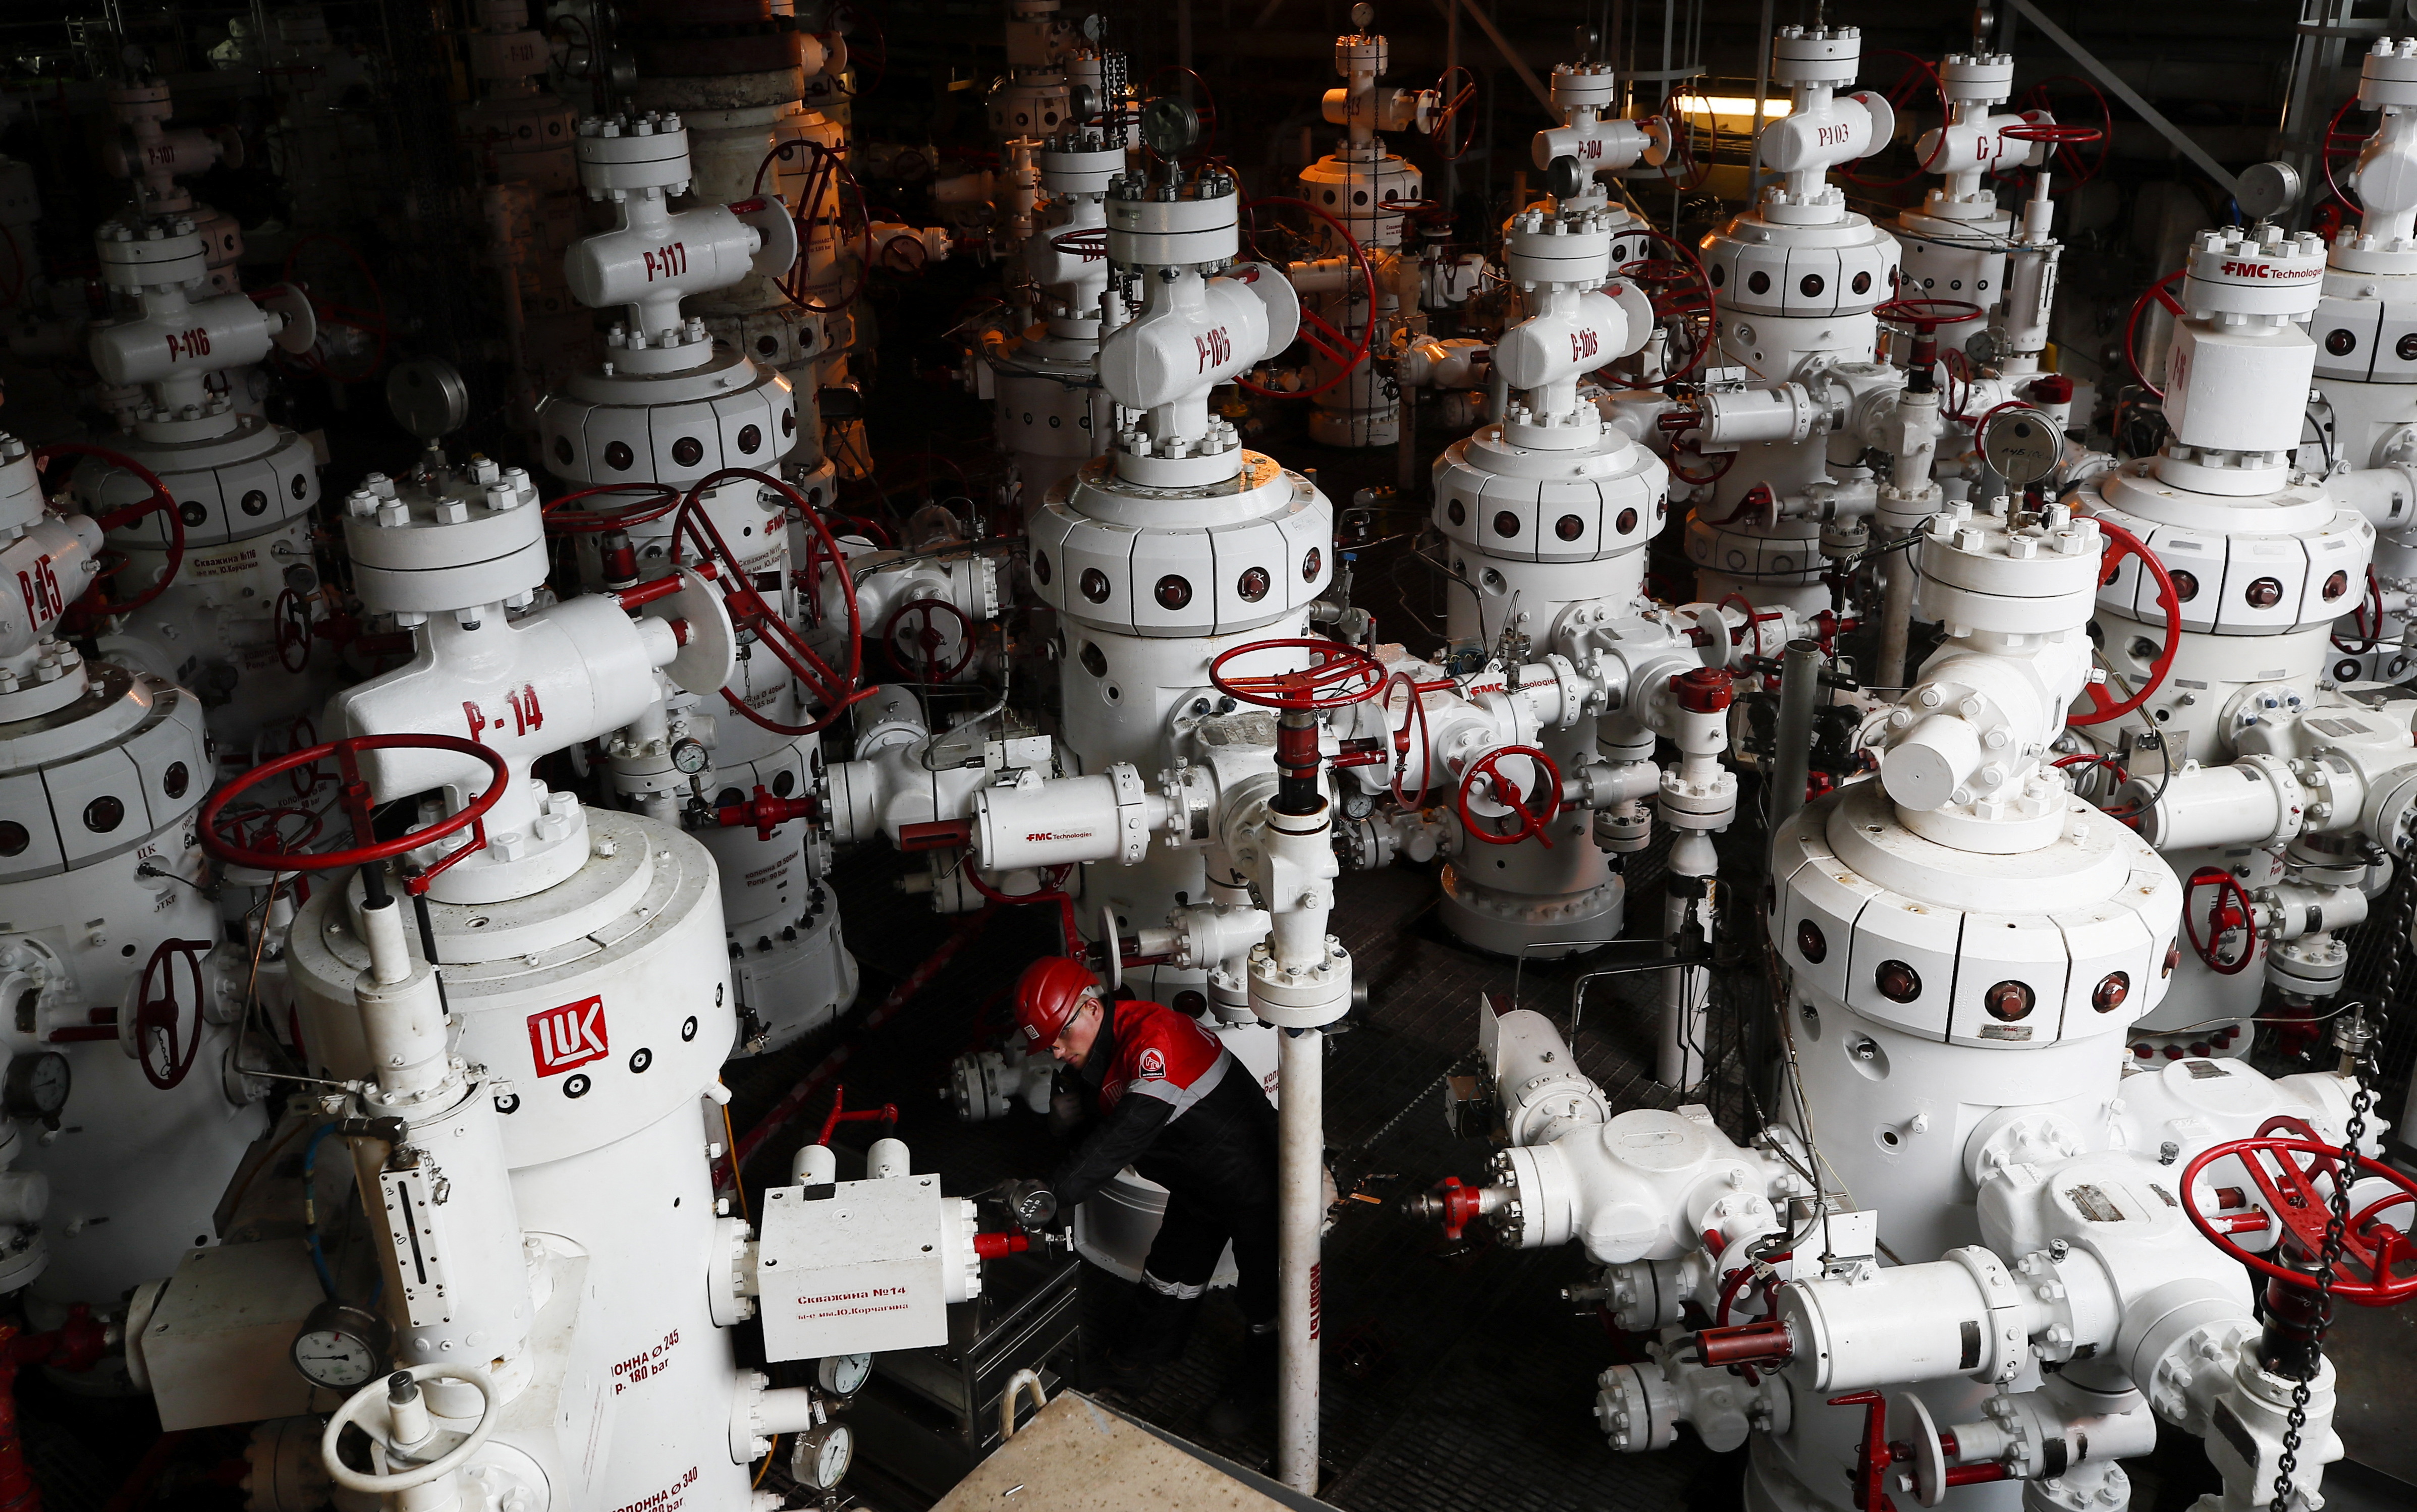 A specialist inspects valves at the Korchagina oil platform operated by Lukoil company in Caspian Sea